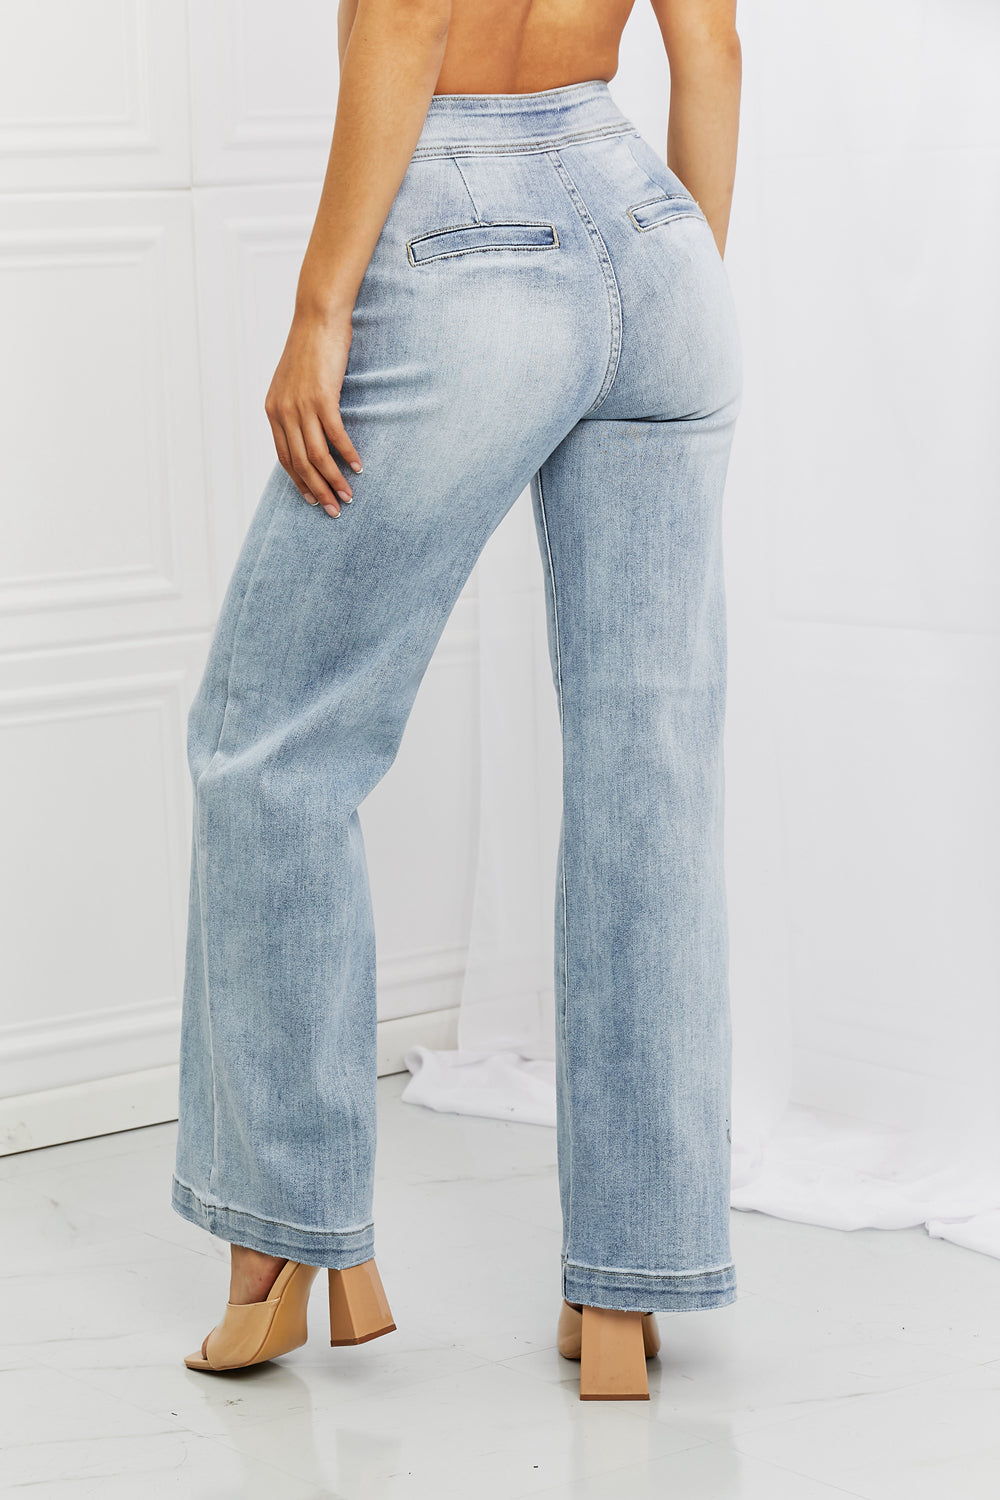 RISEN Celia Wide Flare Jeans Pants RYSE Clothing Co.   